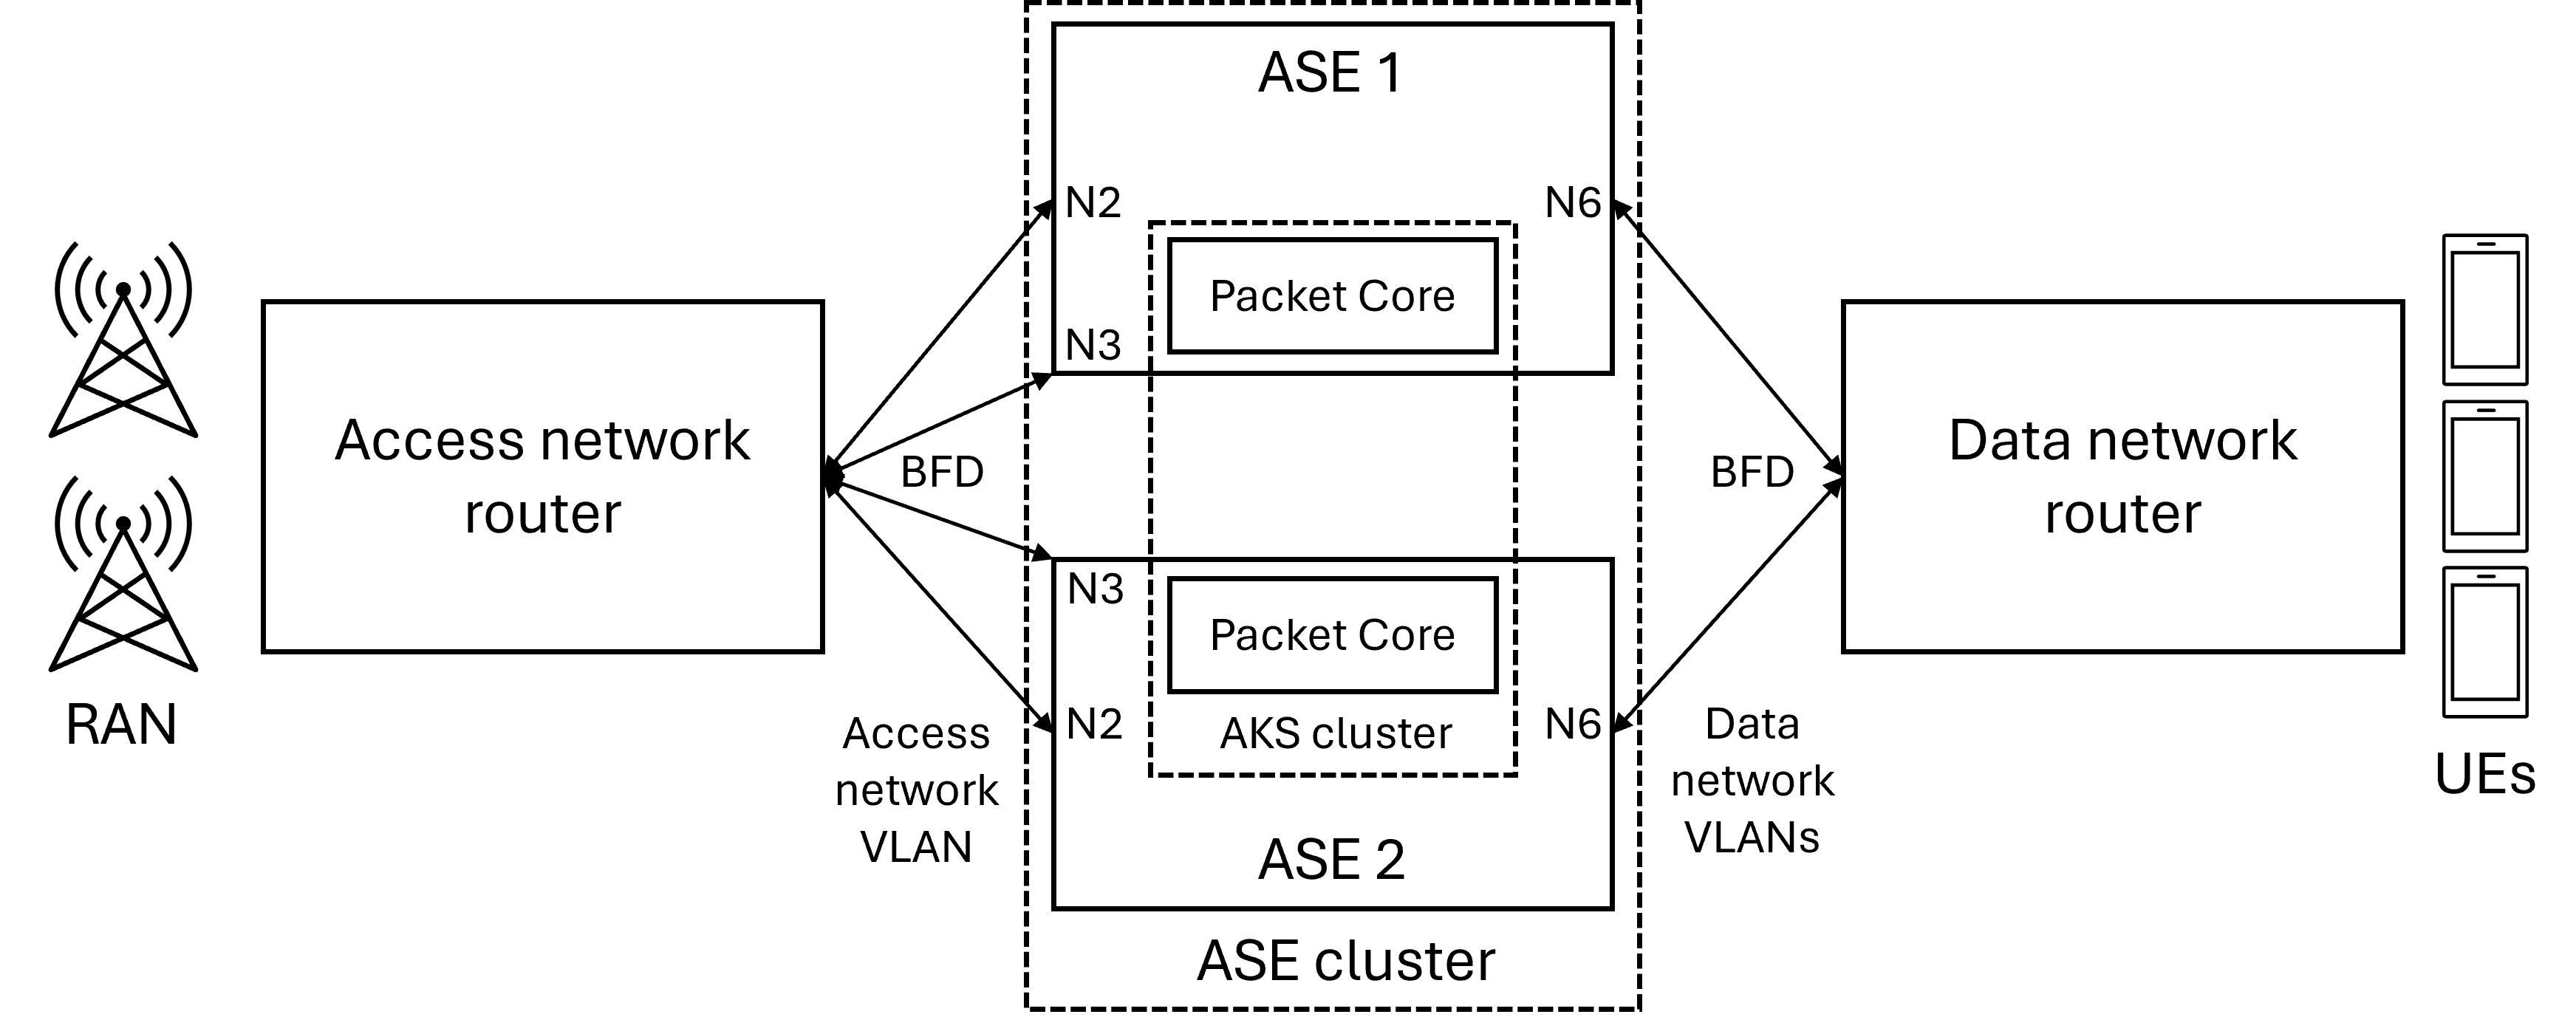 Diagram showing a highly available deployment with a single access network router and a single data network router.